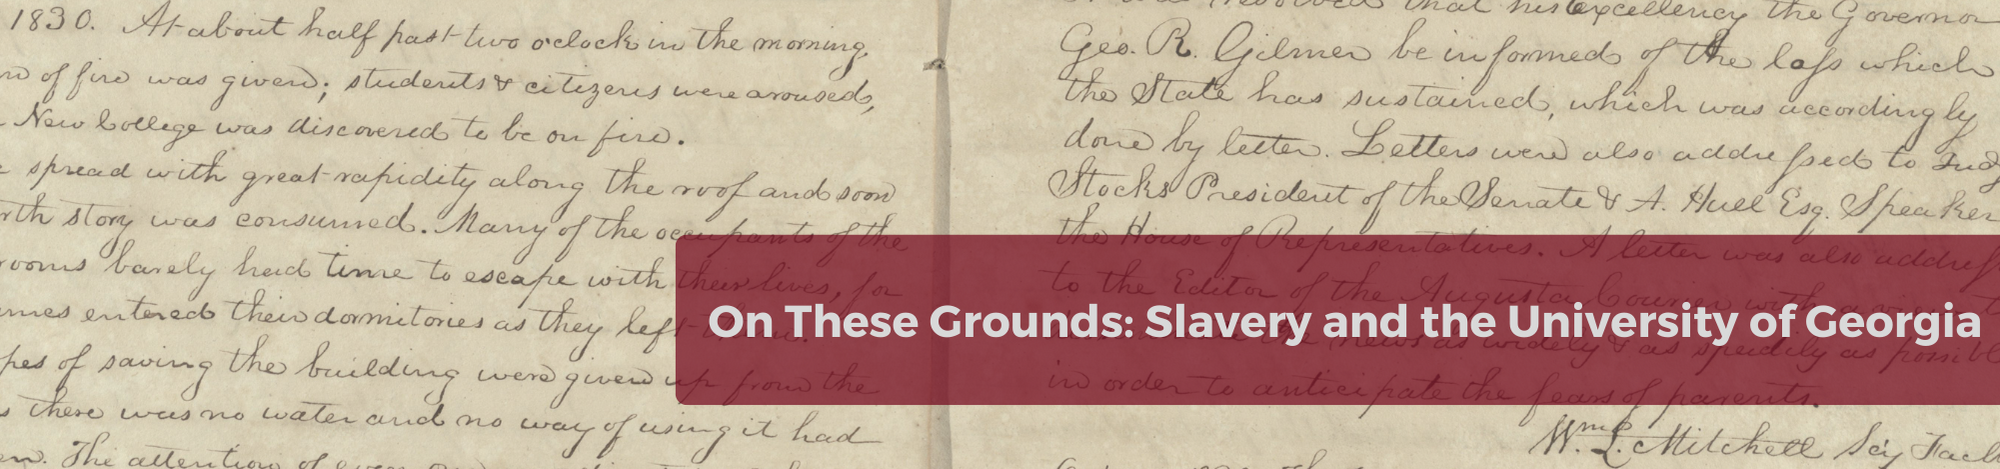 On These Grounds: Slavery and the University of Georgia